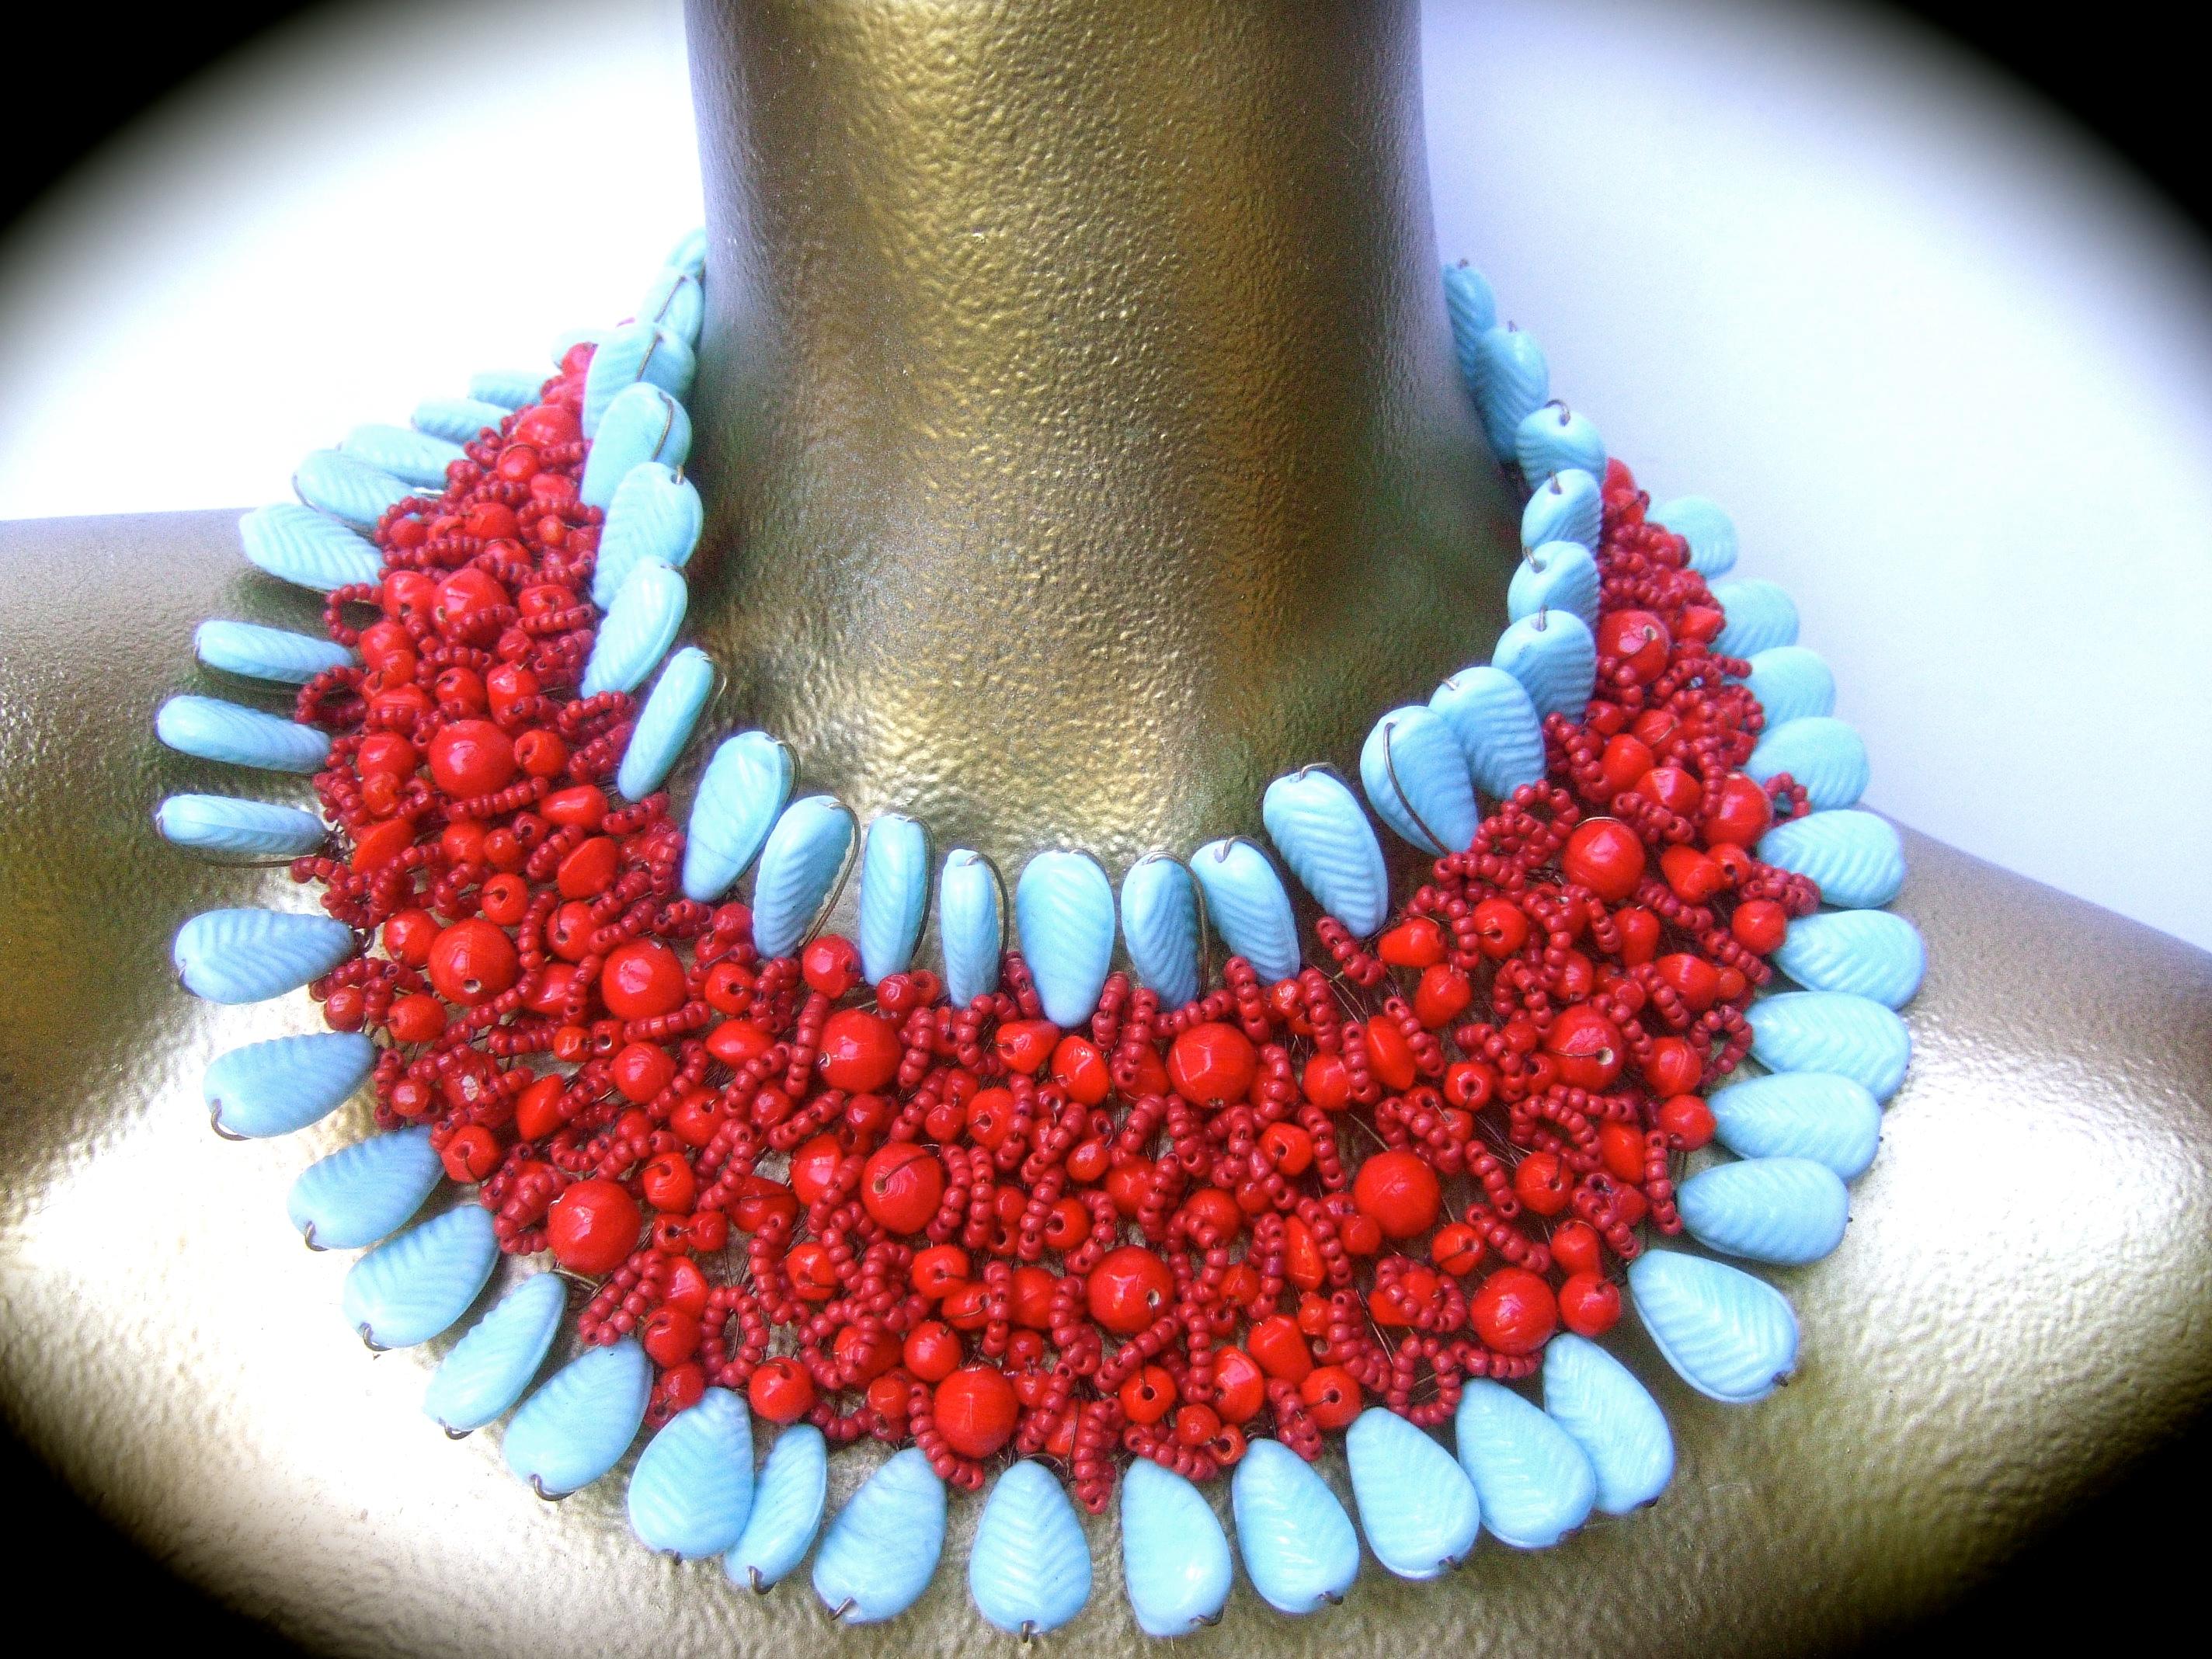 Massive glass beaded handmade artisan choker bib collar necklace 21st c 
The bold avant-garde large scale wide choker bib necklace is comprised of a collection of pale aqua blue glass stones that frames the border edges. The collection of